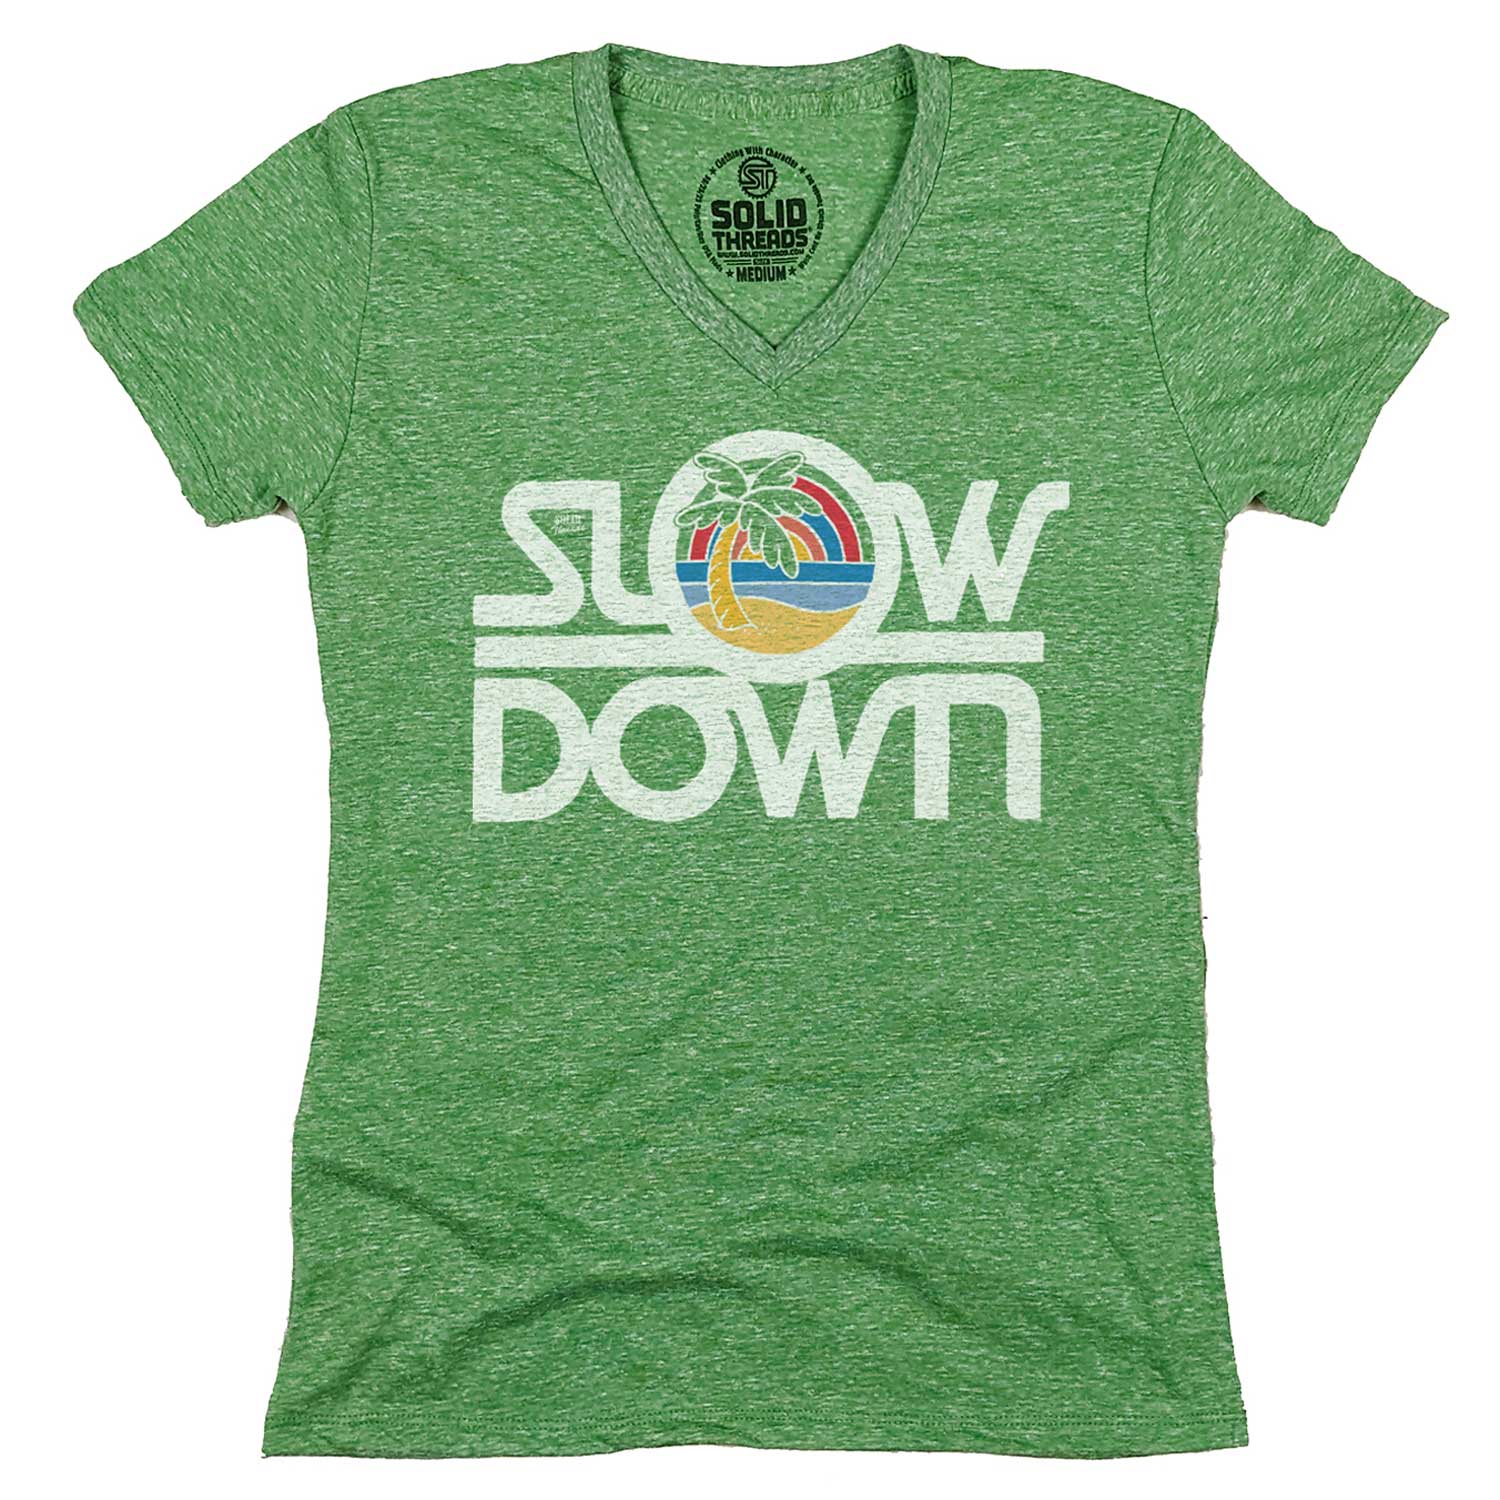 Women's Slow Down Vintage Graphic V-Neck Tee | Retro Vacation T-shirt | Solid Threads